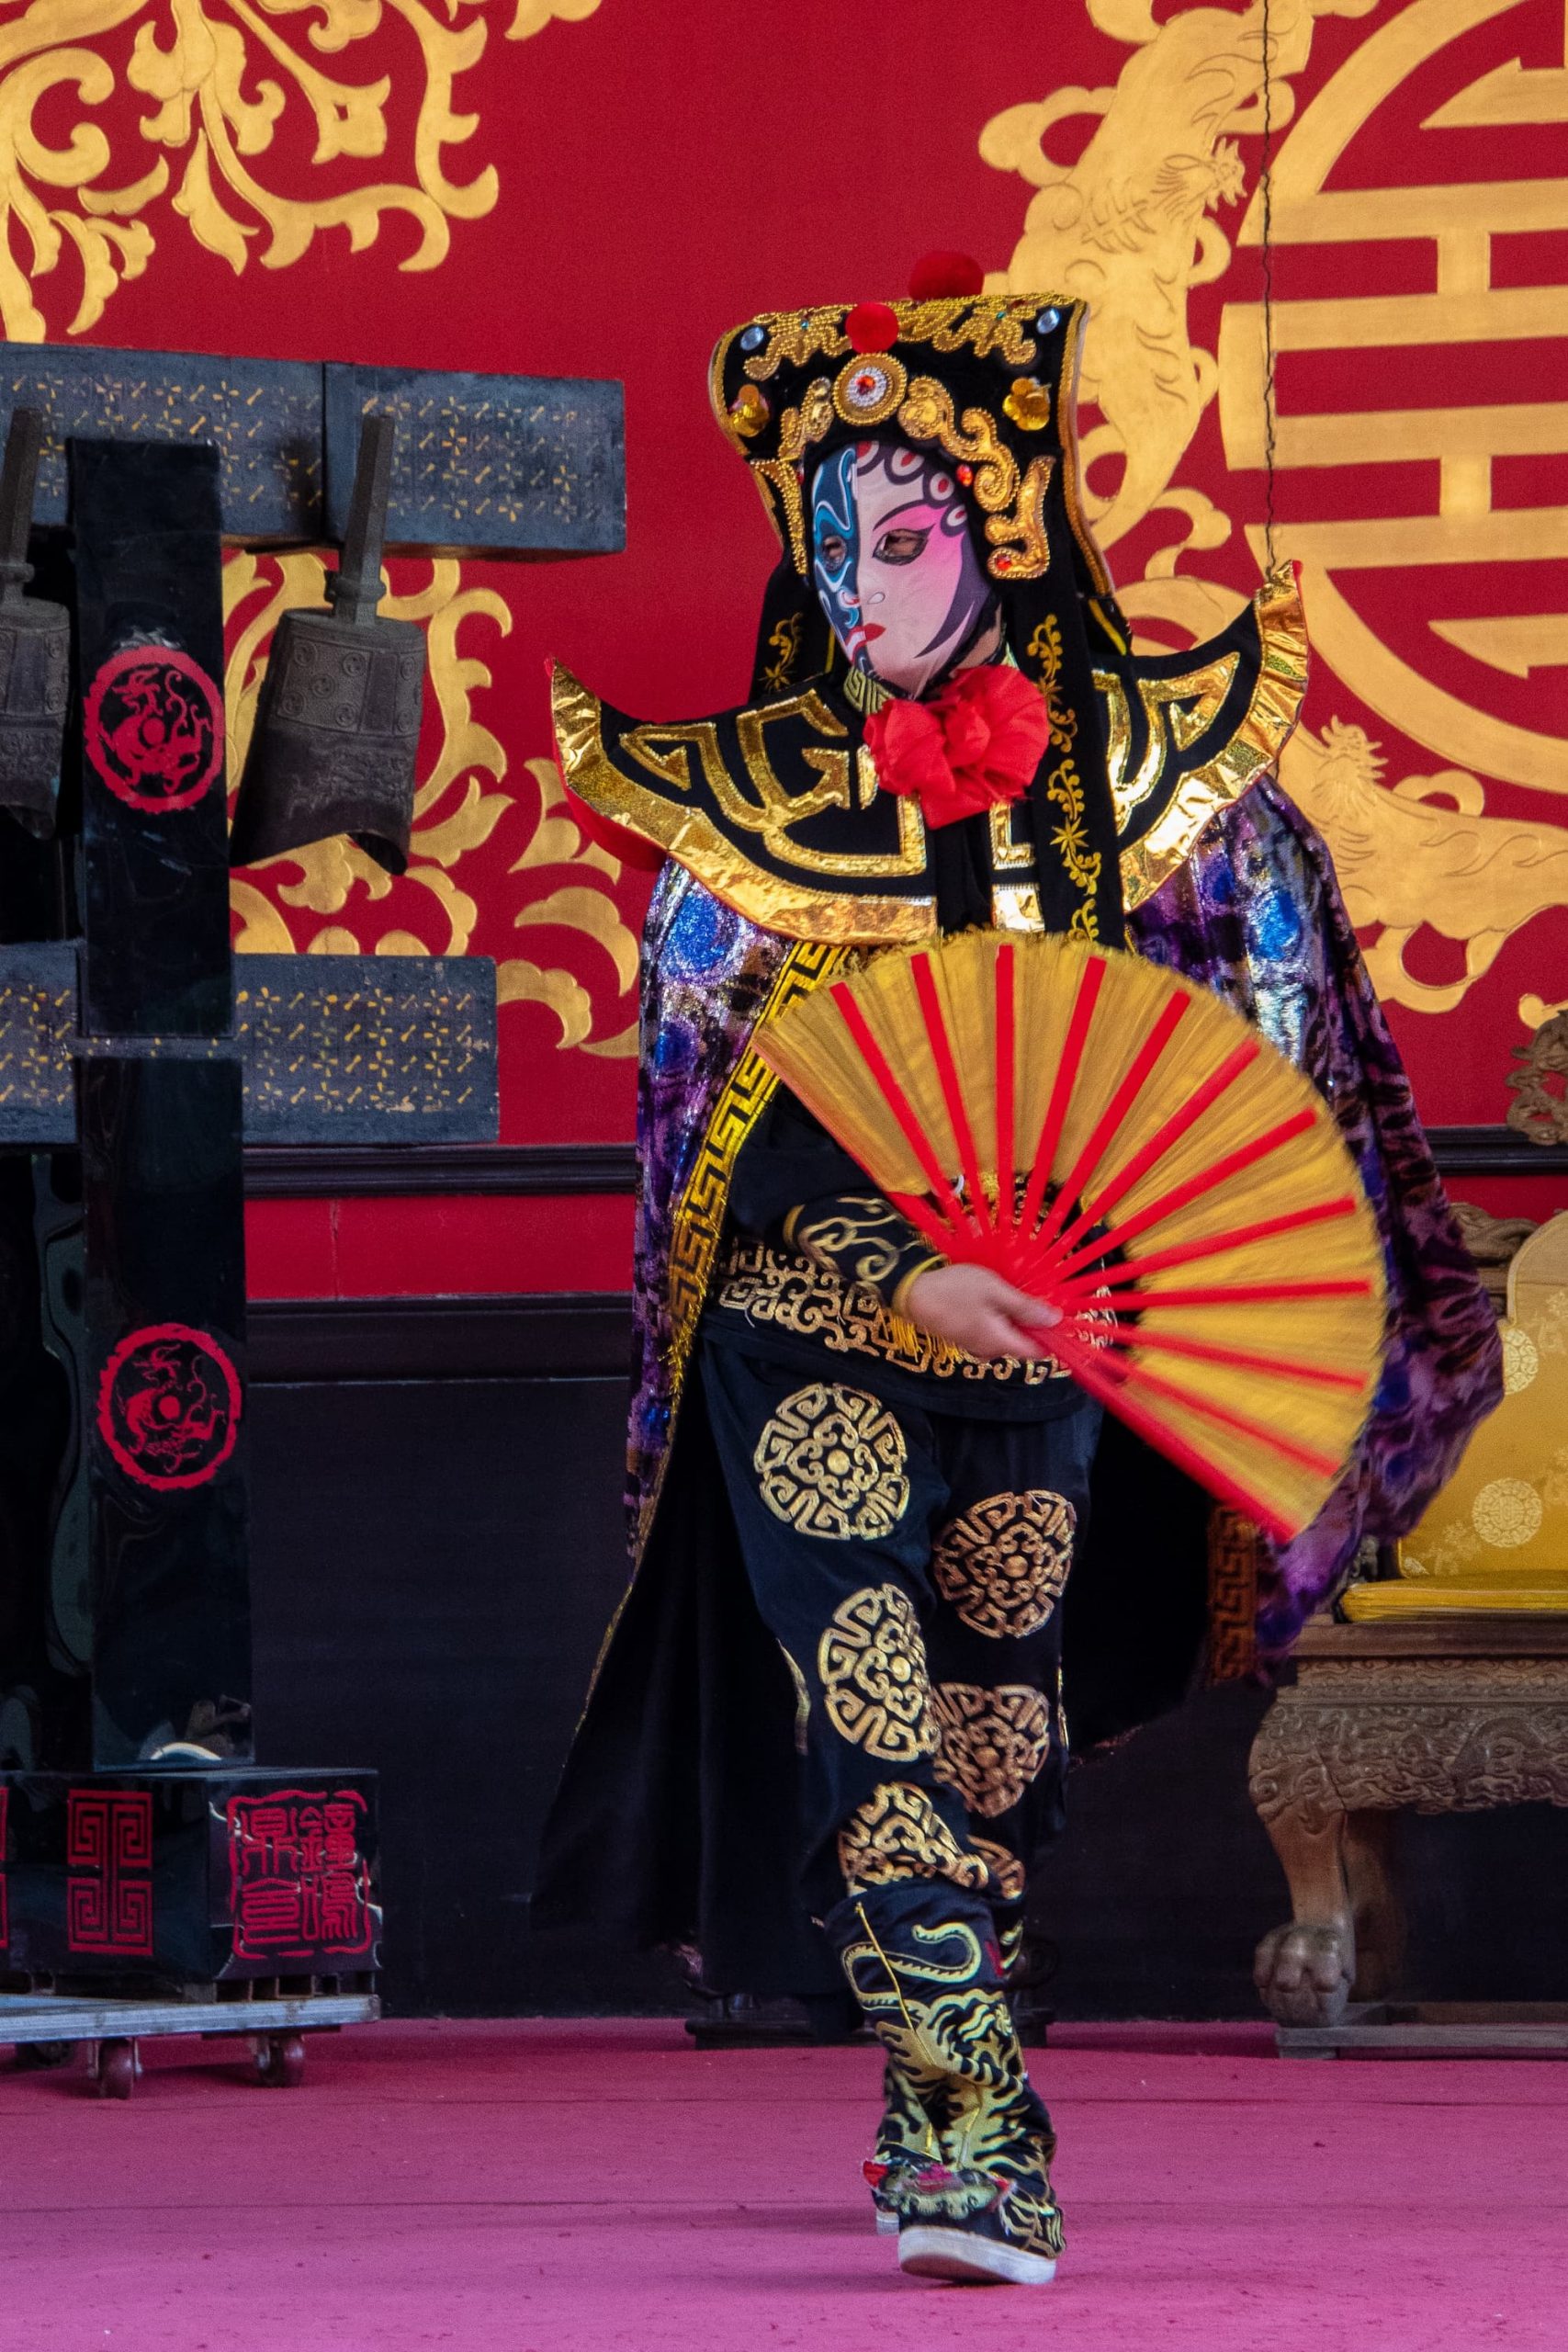 A Chinese mask actor in Beijing